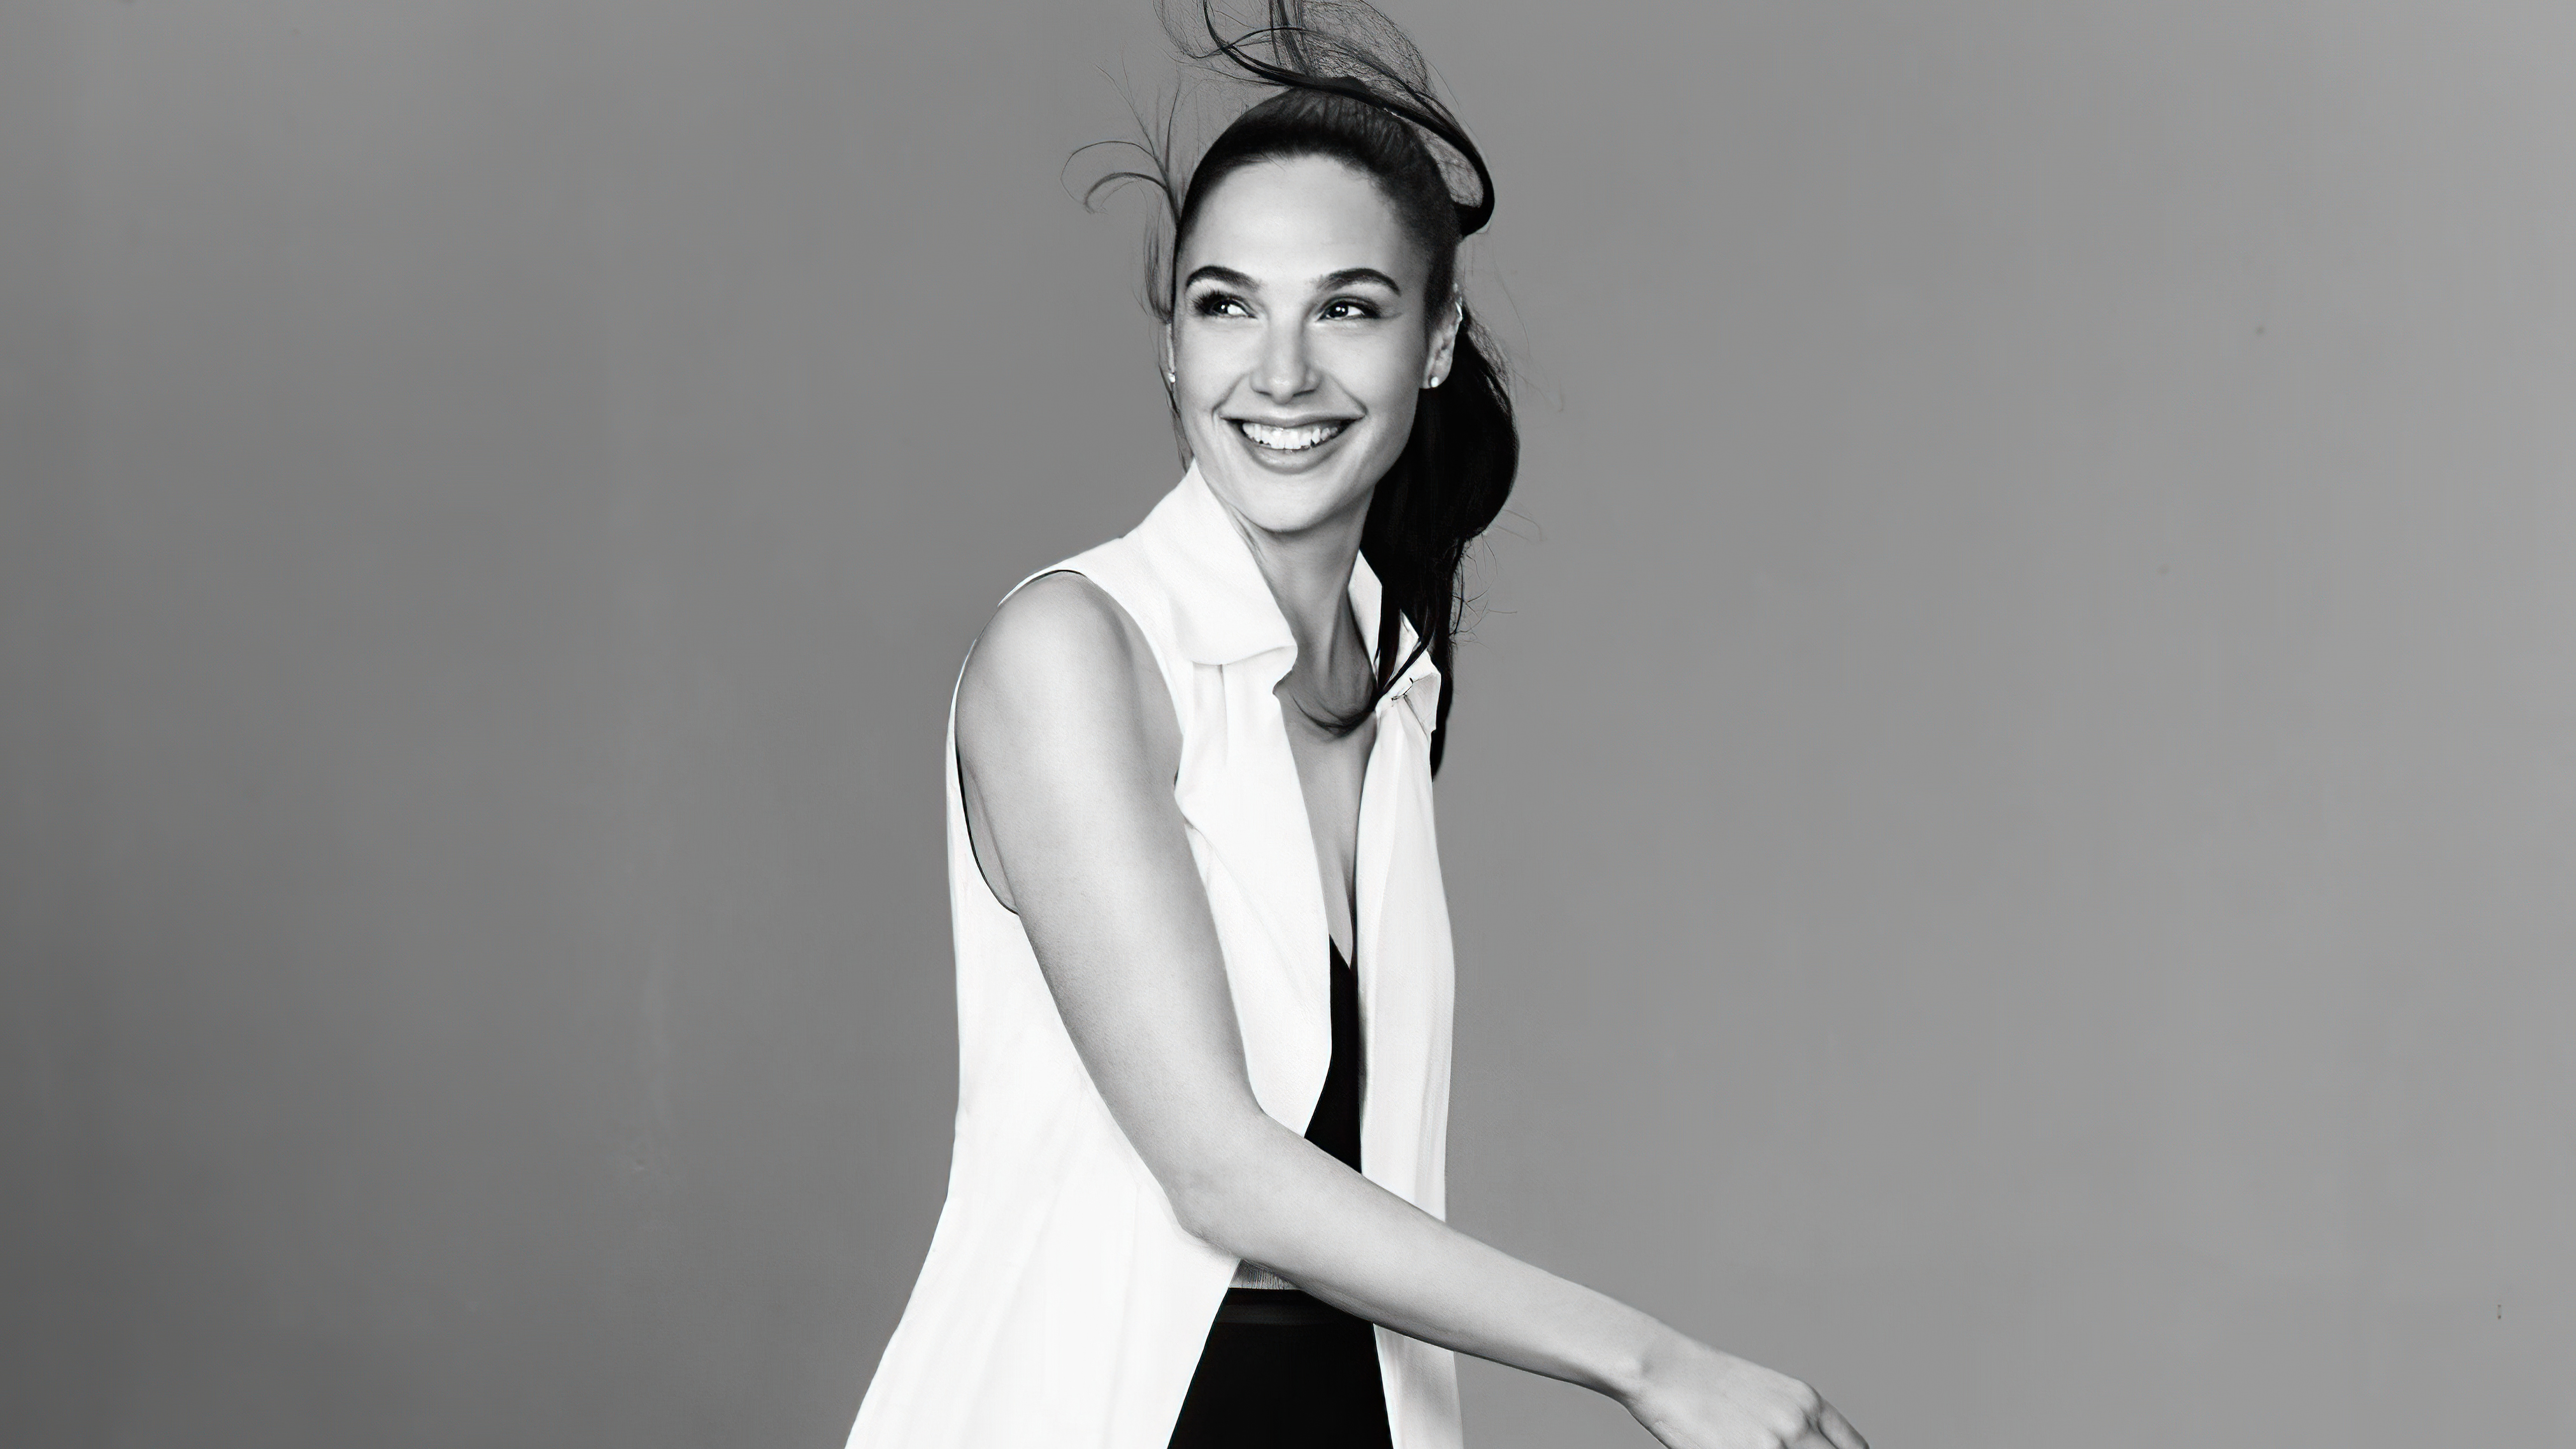 Wallpapers Gal Gadot celebrities black and white on the desktop